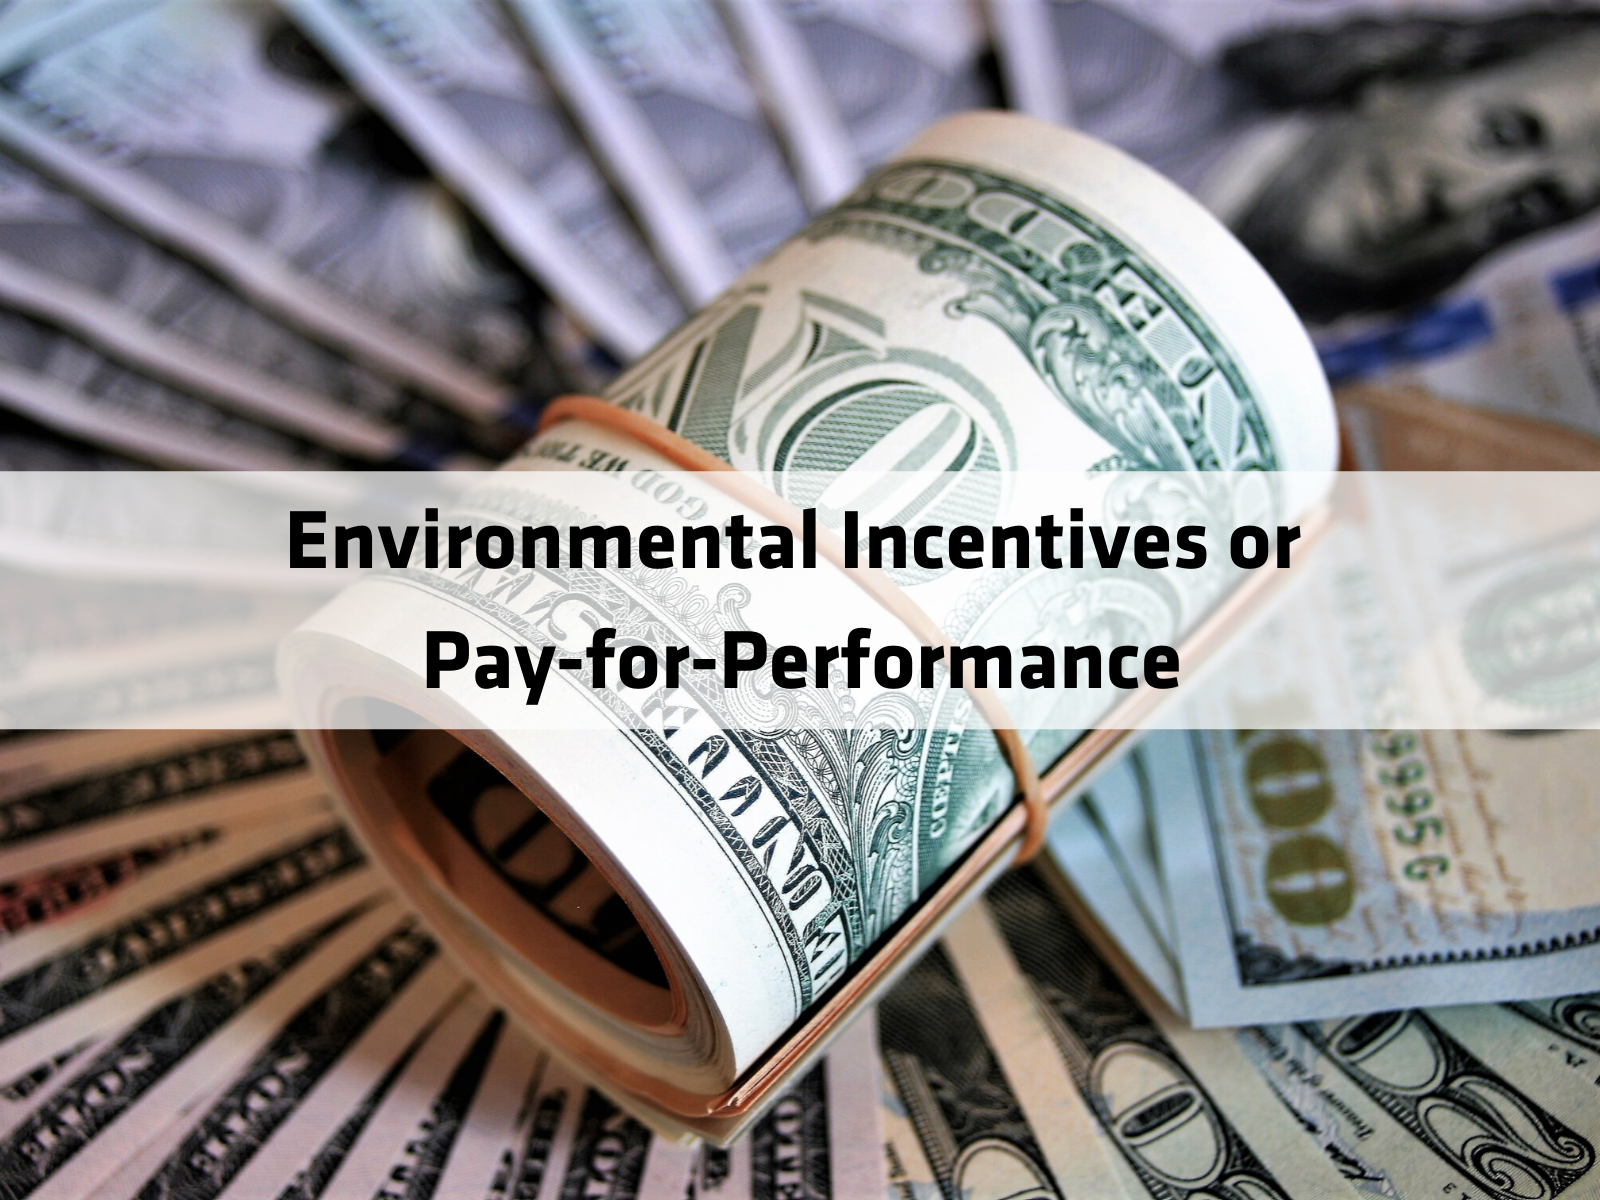 Environmental Incentives or Pay-for-Performance